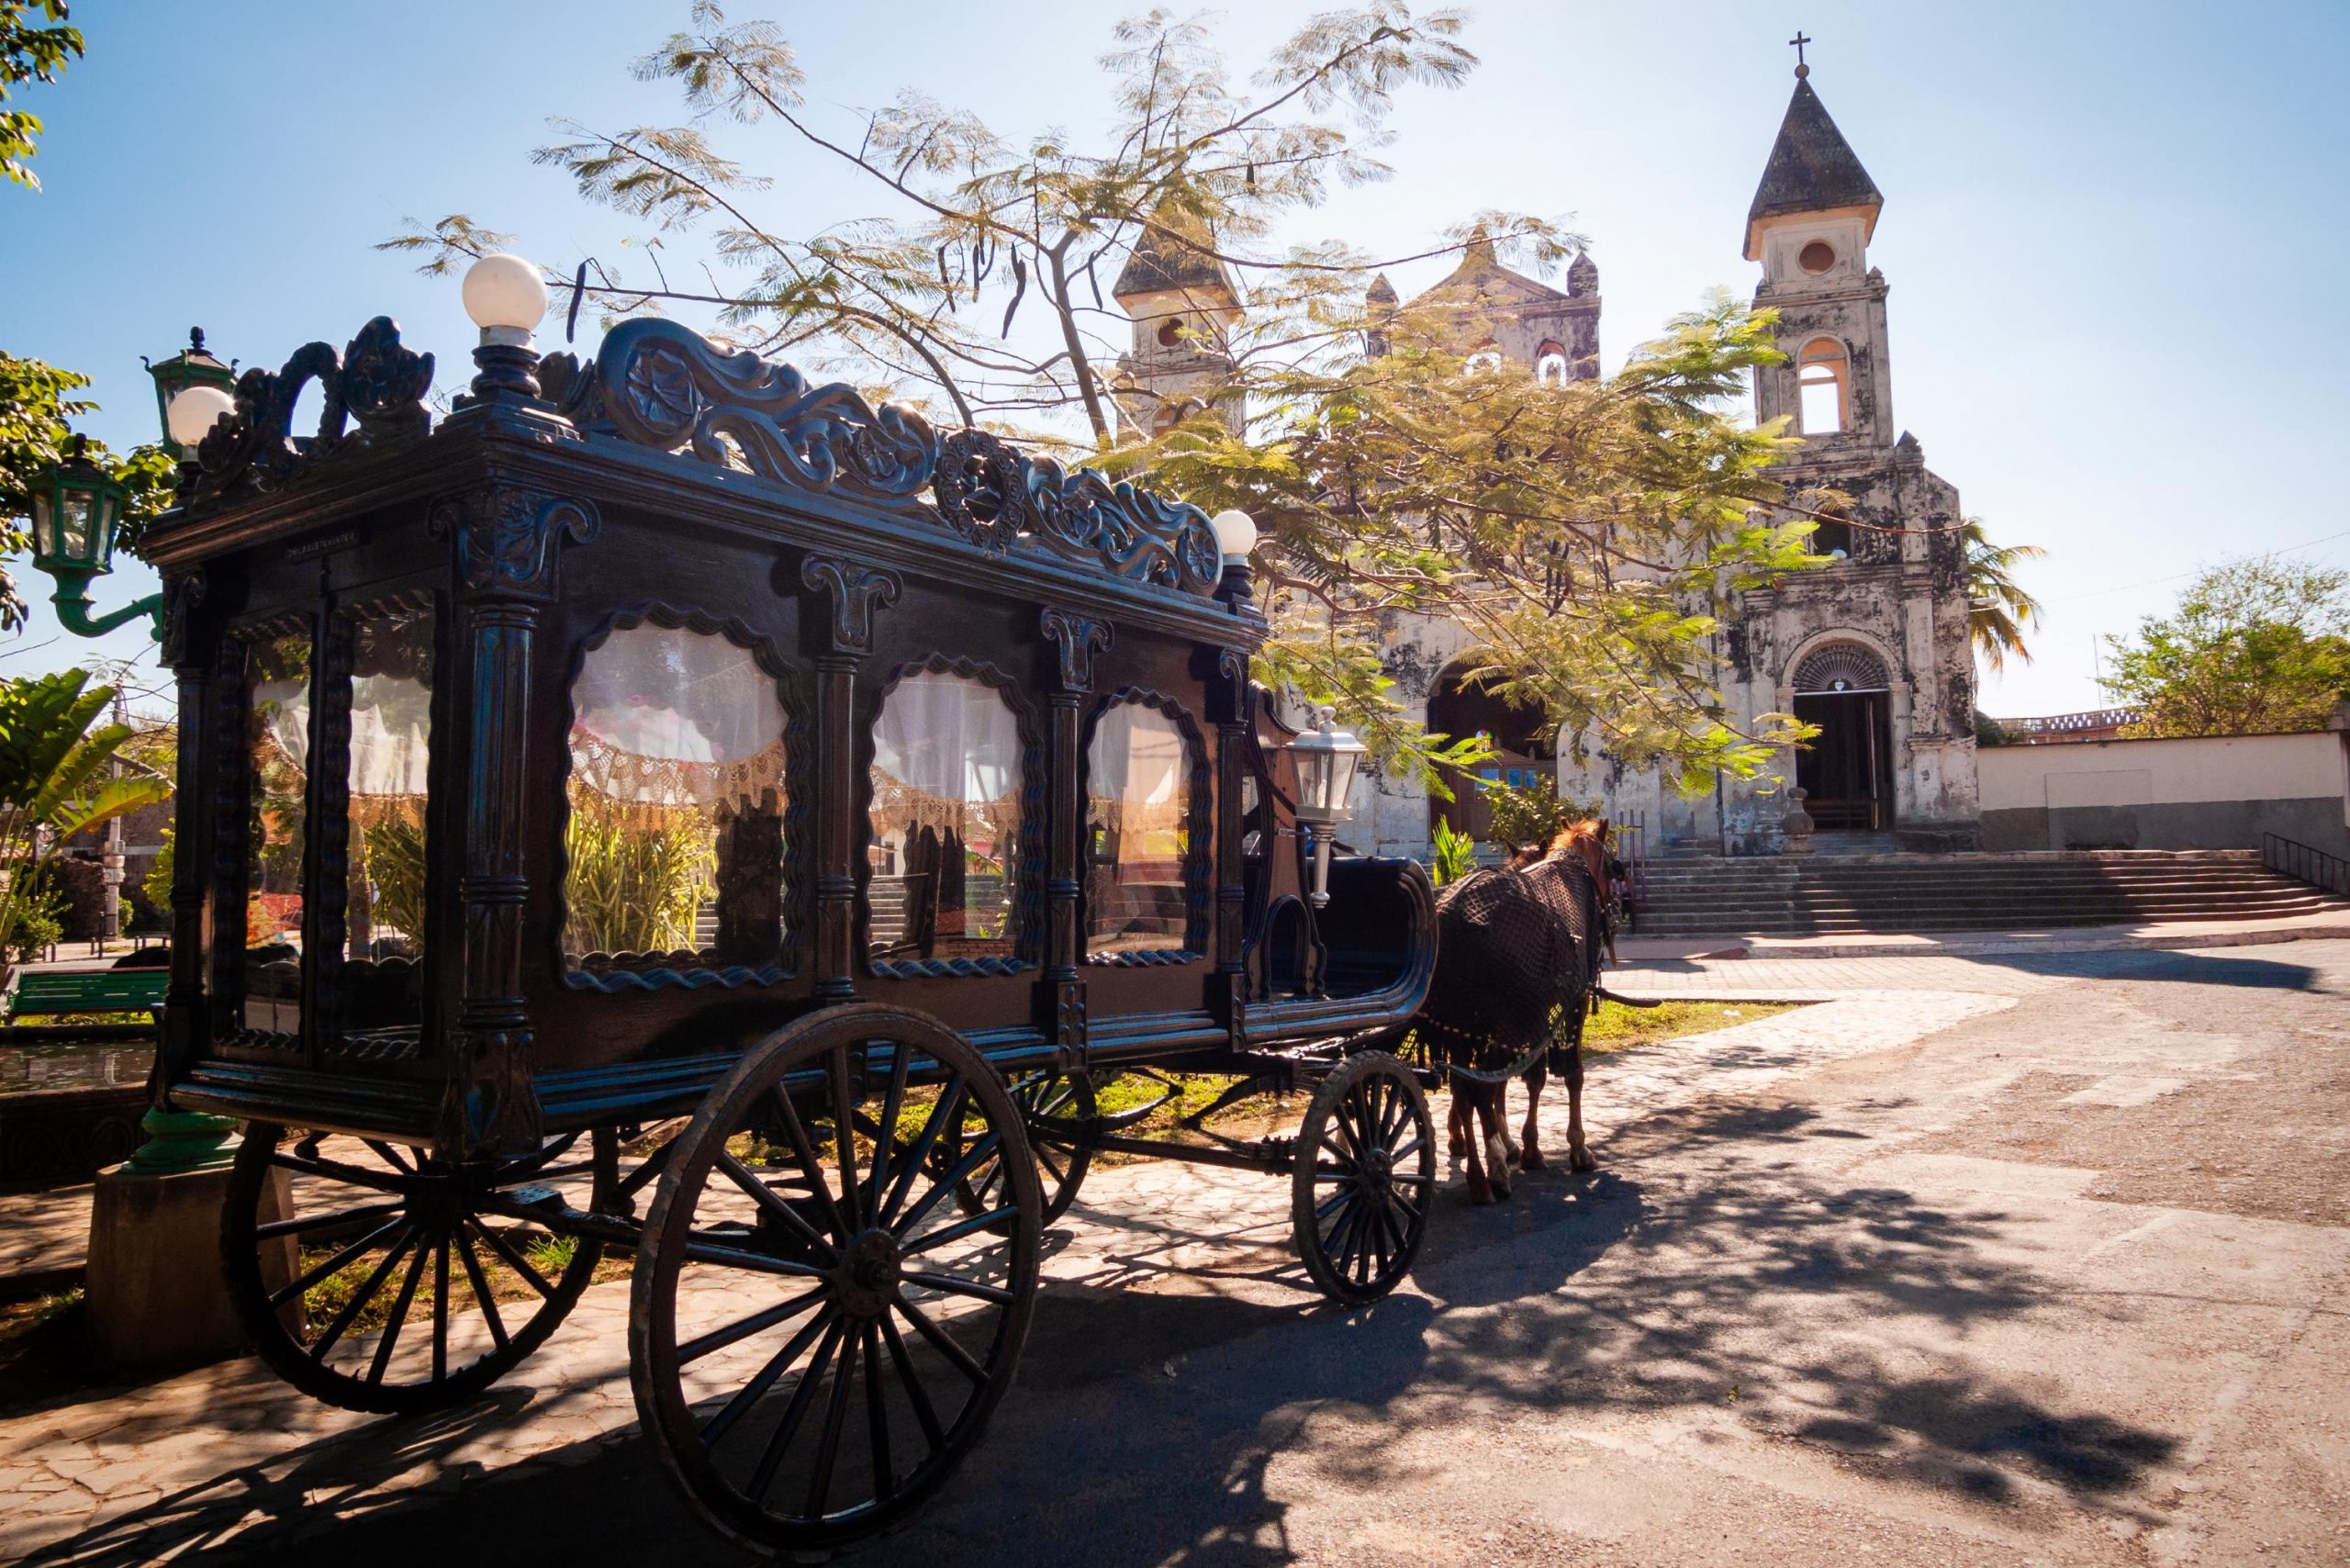 A horse-drawn carriage sits outside of a church.